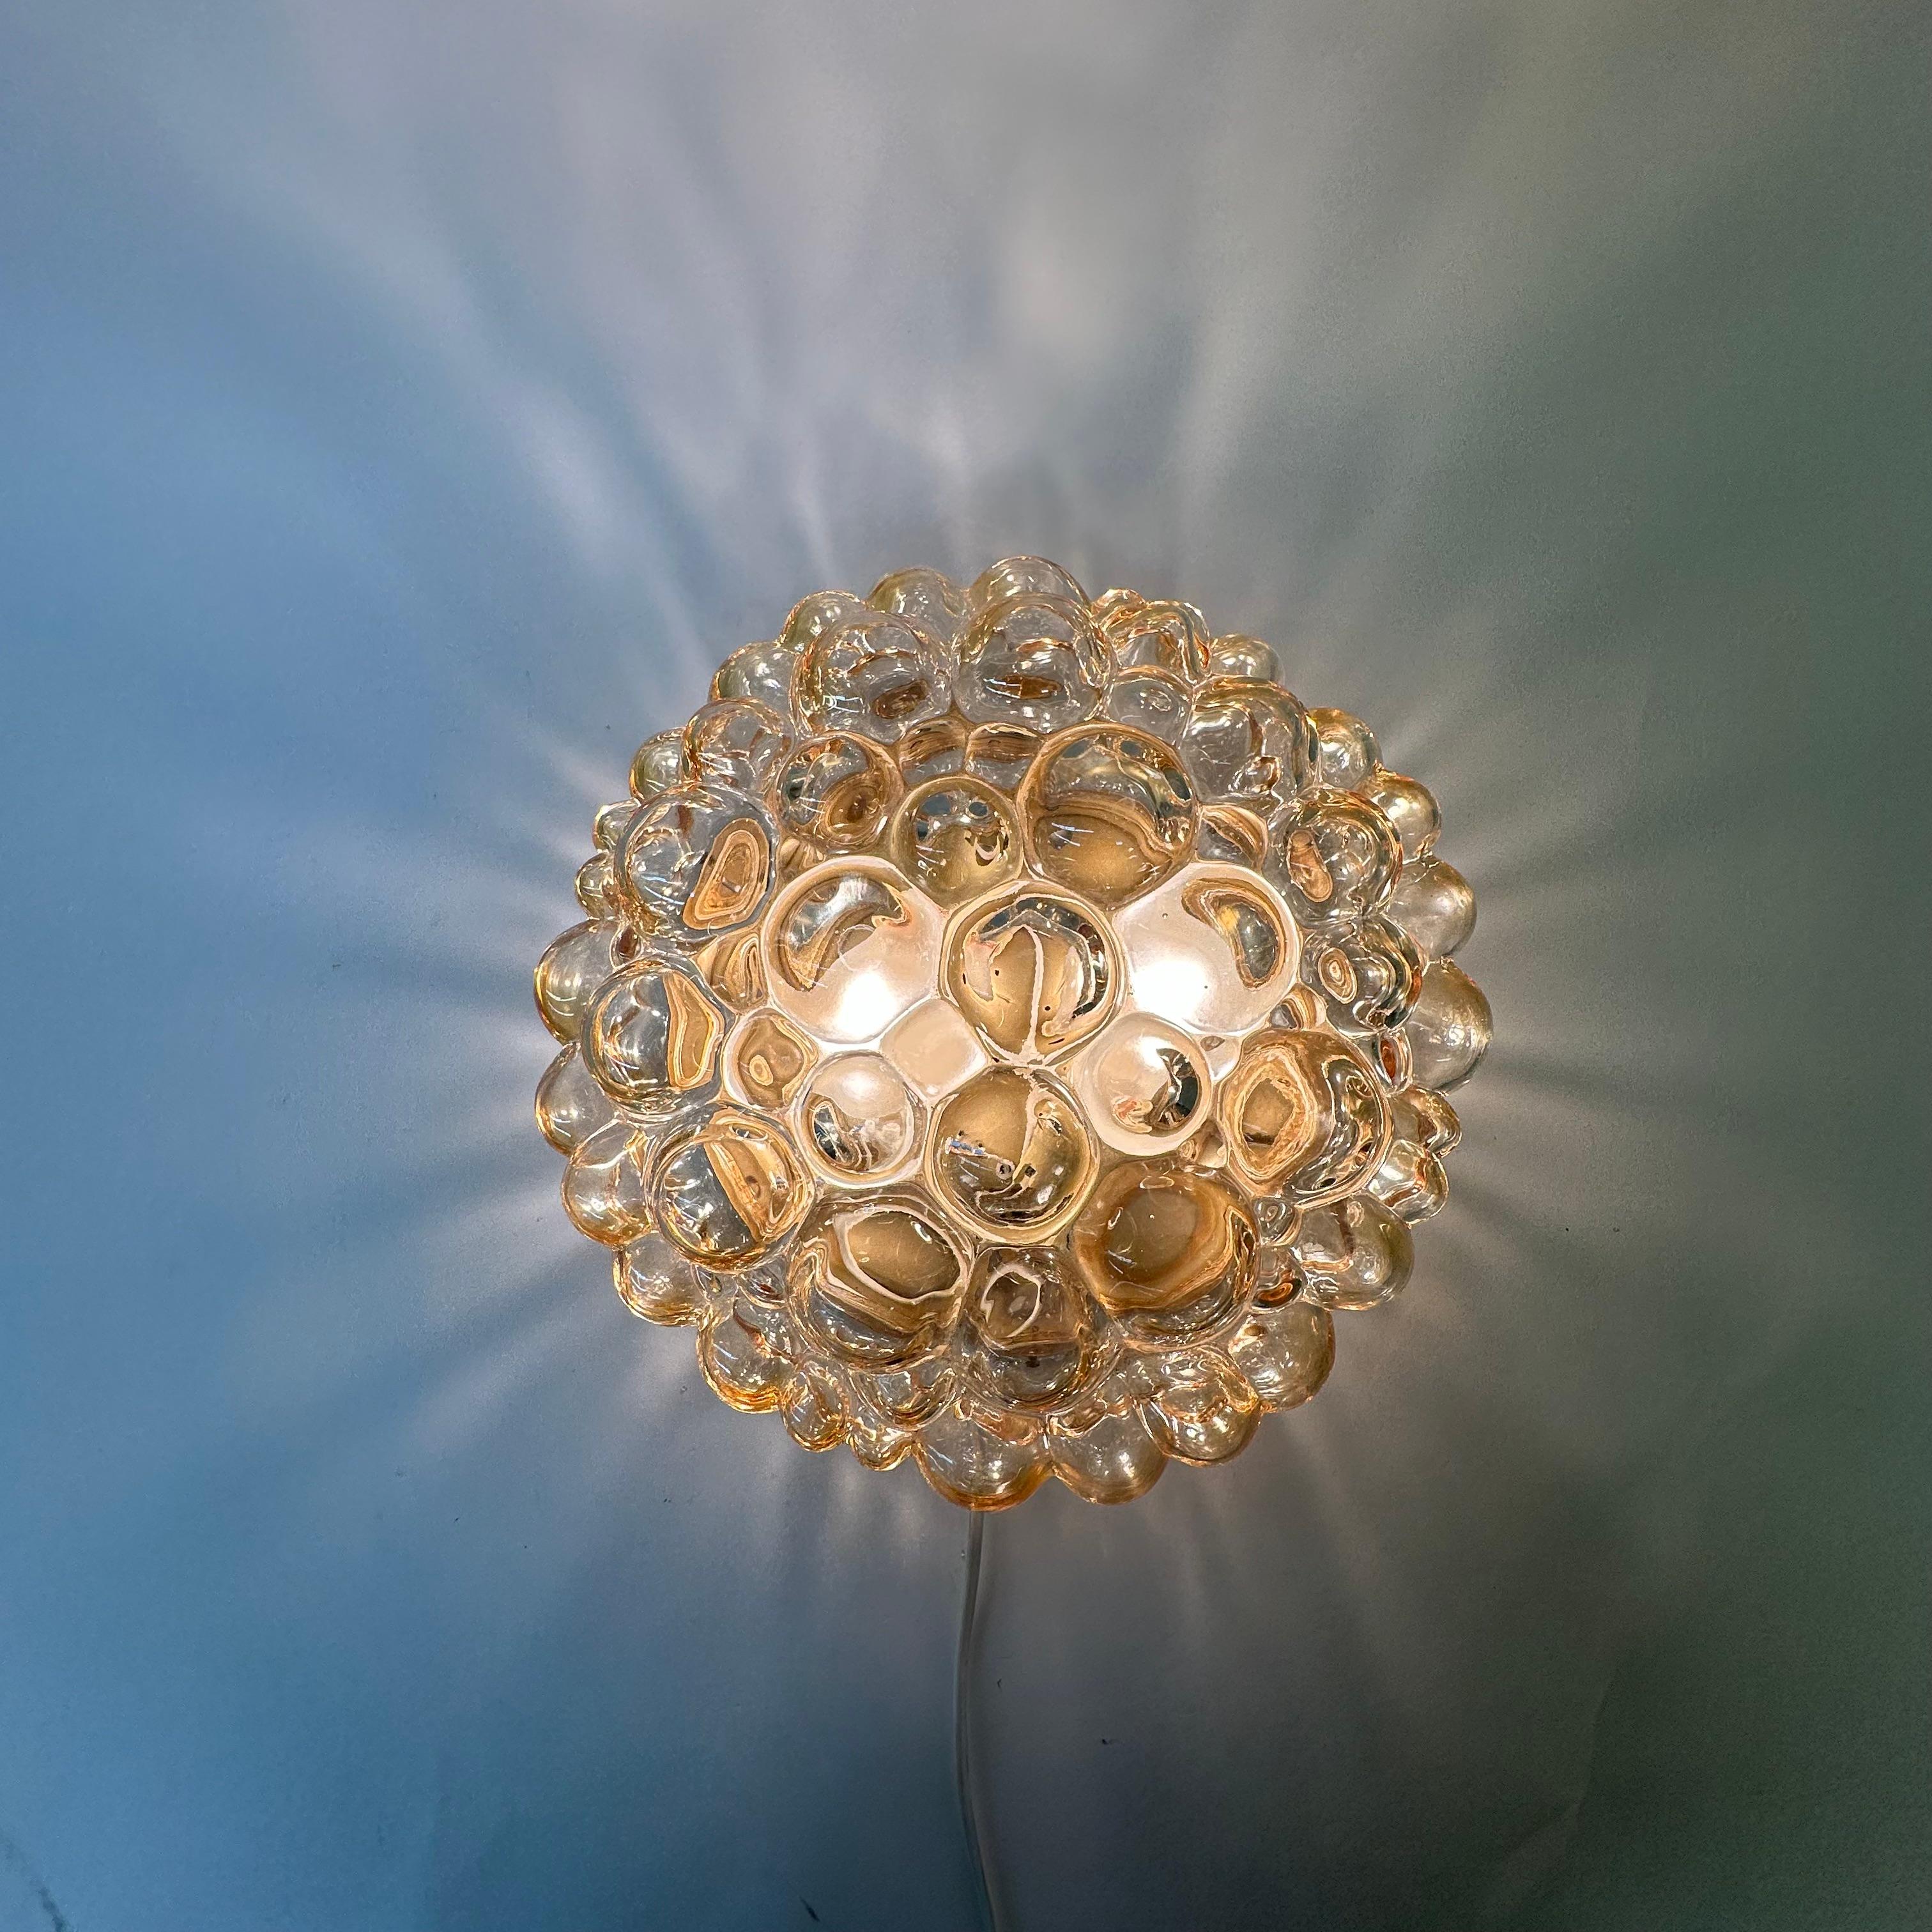 Helena tynell bubble glass flush mount ceiling lamp , 1970’s Germany

Dimensions: 30cm Diameter , 13cm Height
Condition: Good
Material: Glass , metal
Color: Gold
Manufacturer: Helena Tynell